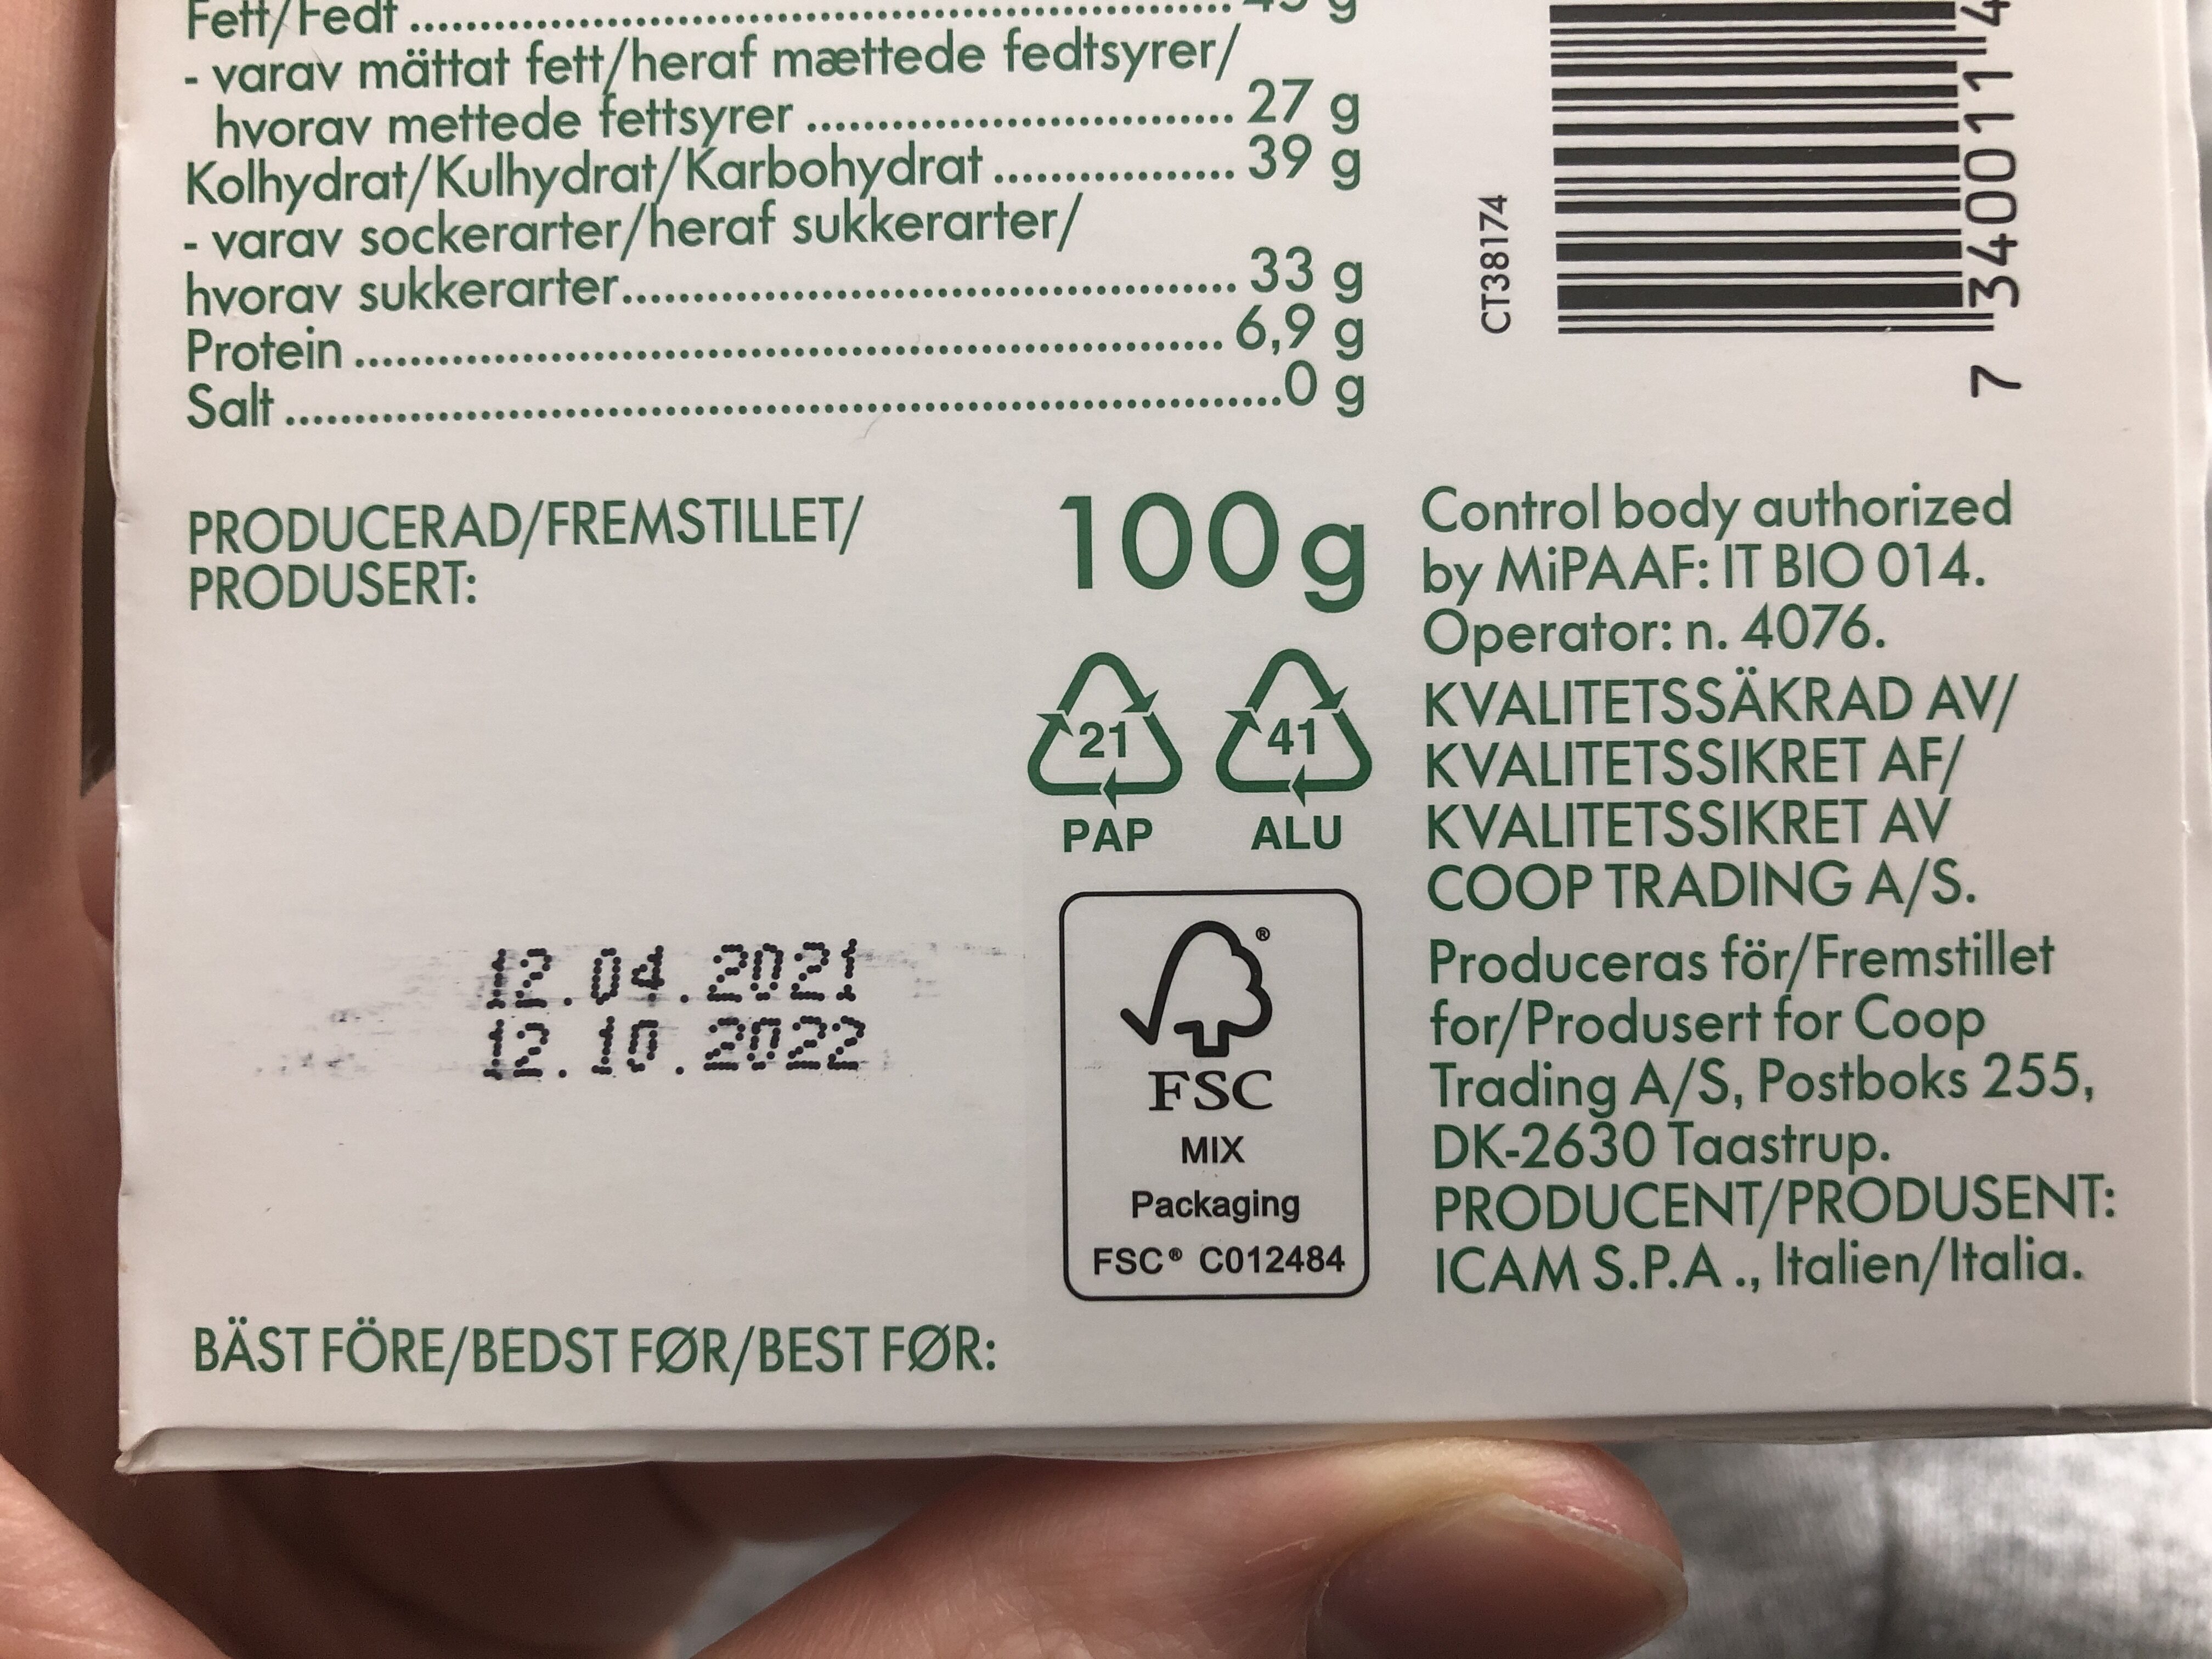 Chocolate menta - Recycling instructions and/or packaging information